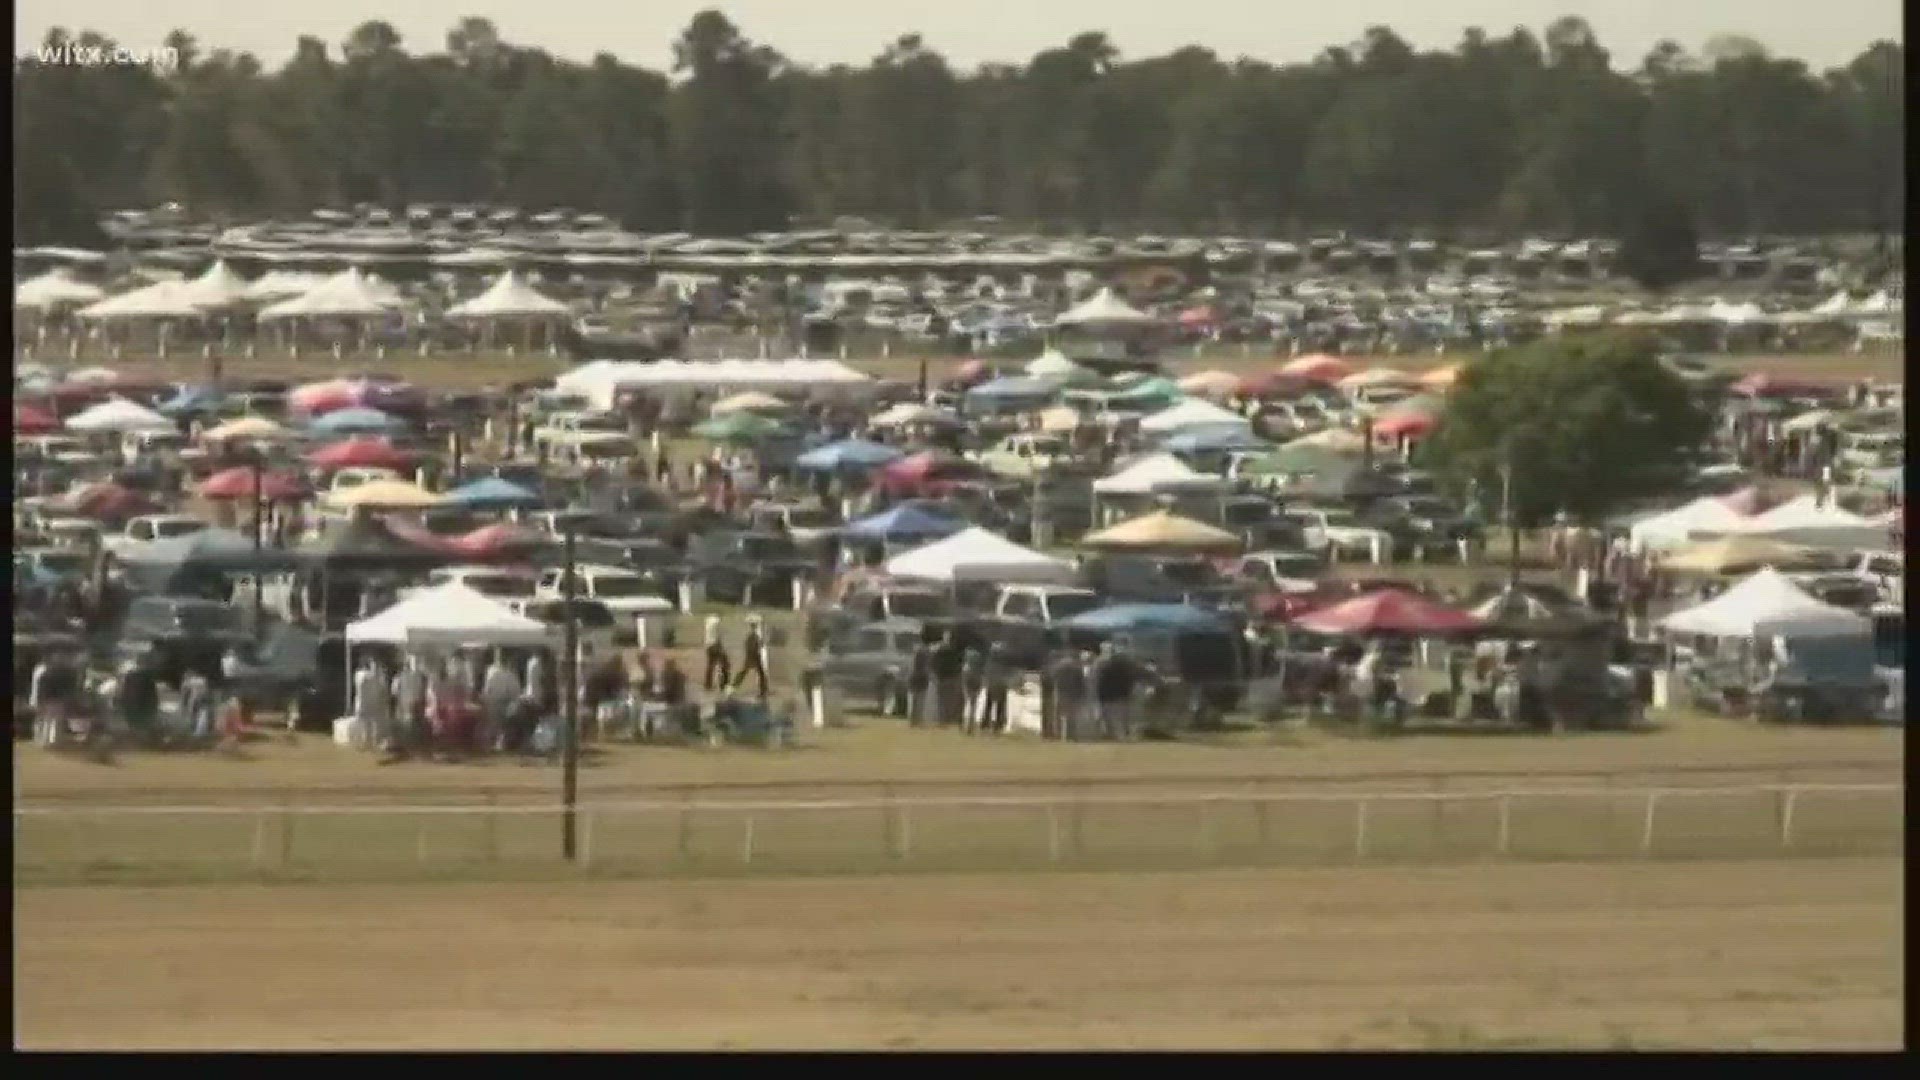 84th Carolina Cup will take place on March 31.  Organizers say this will be the last year for College Park